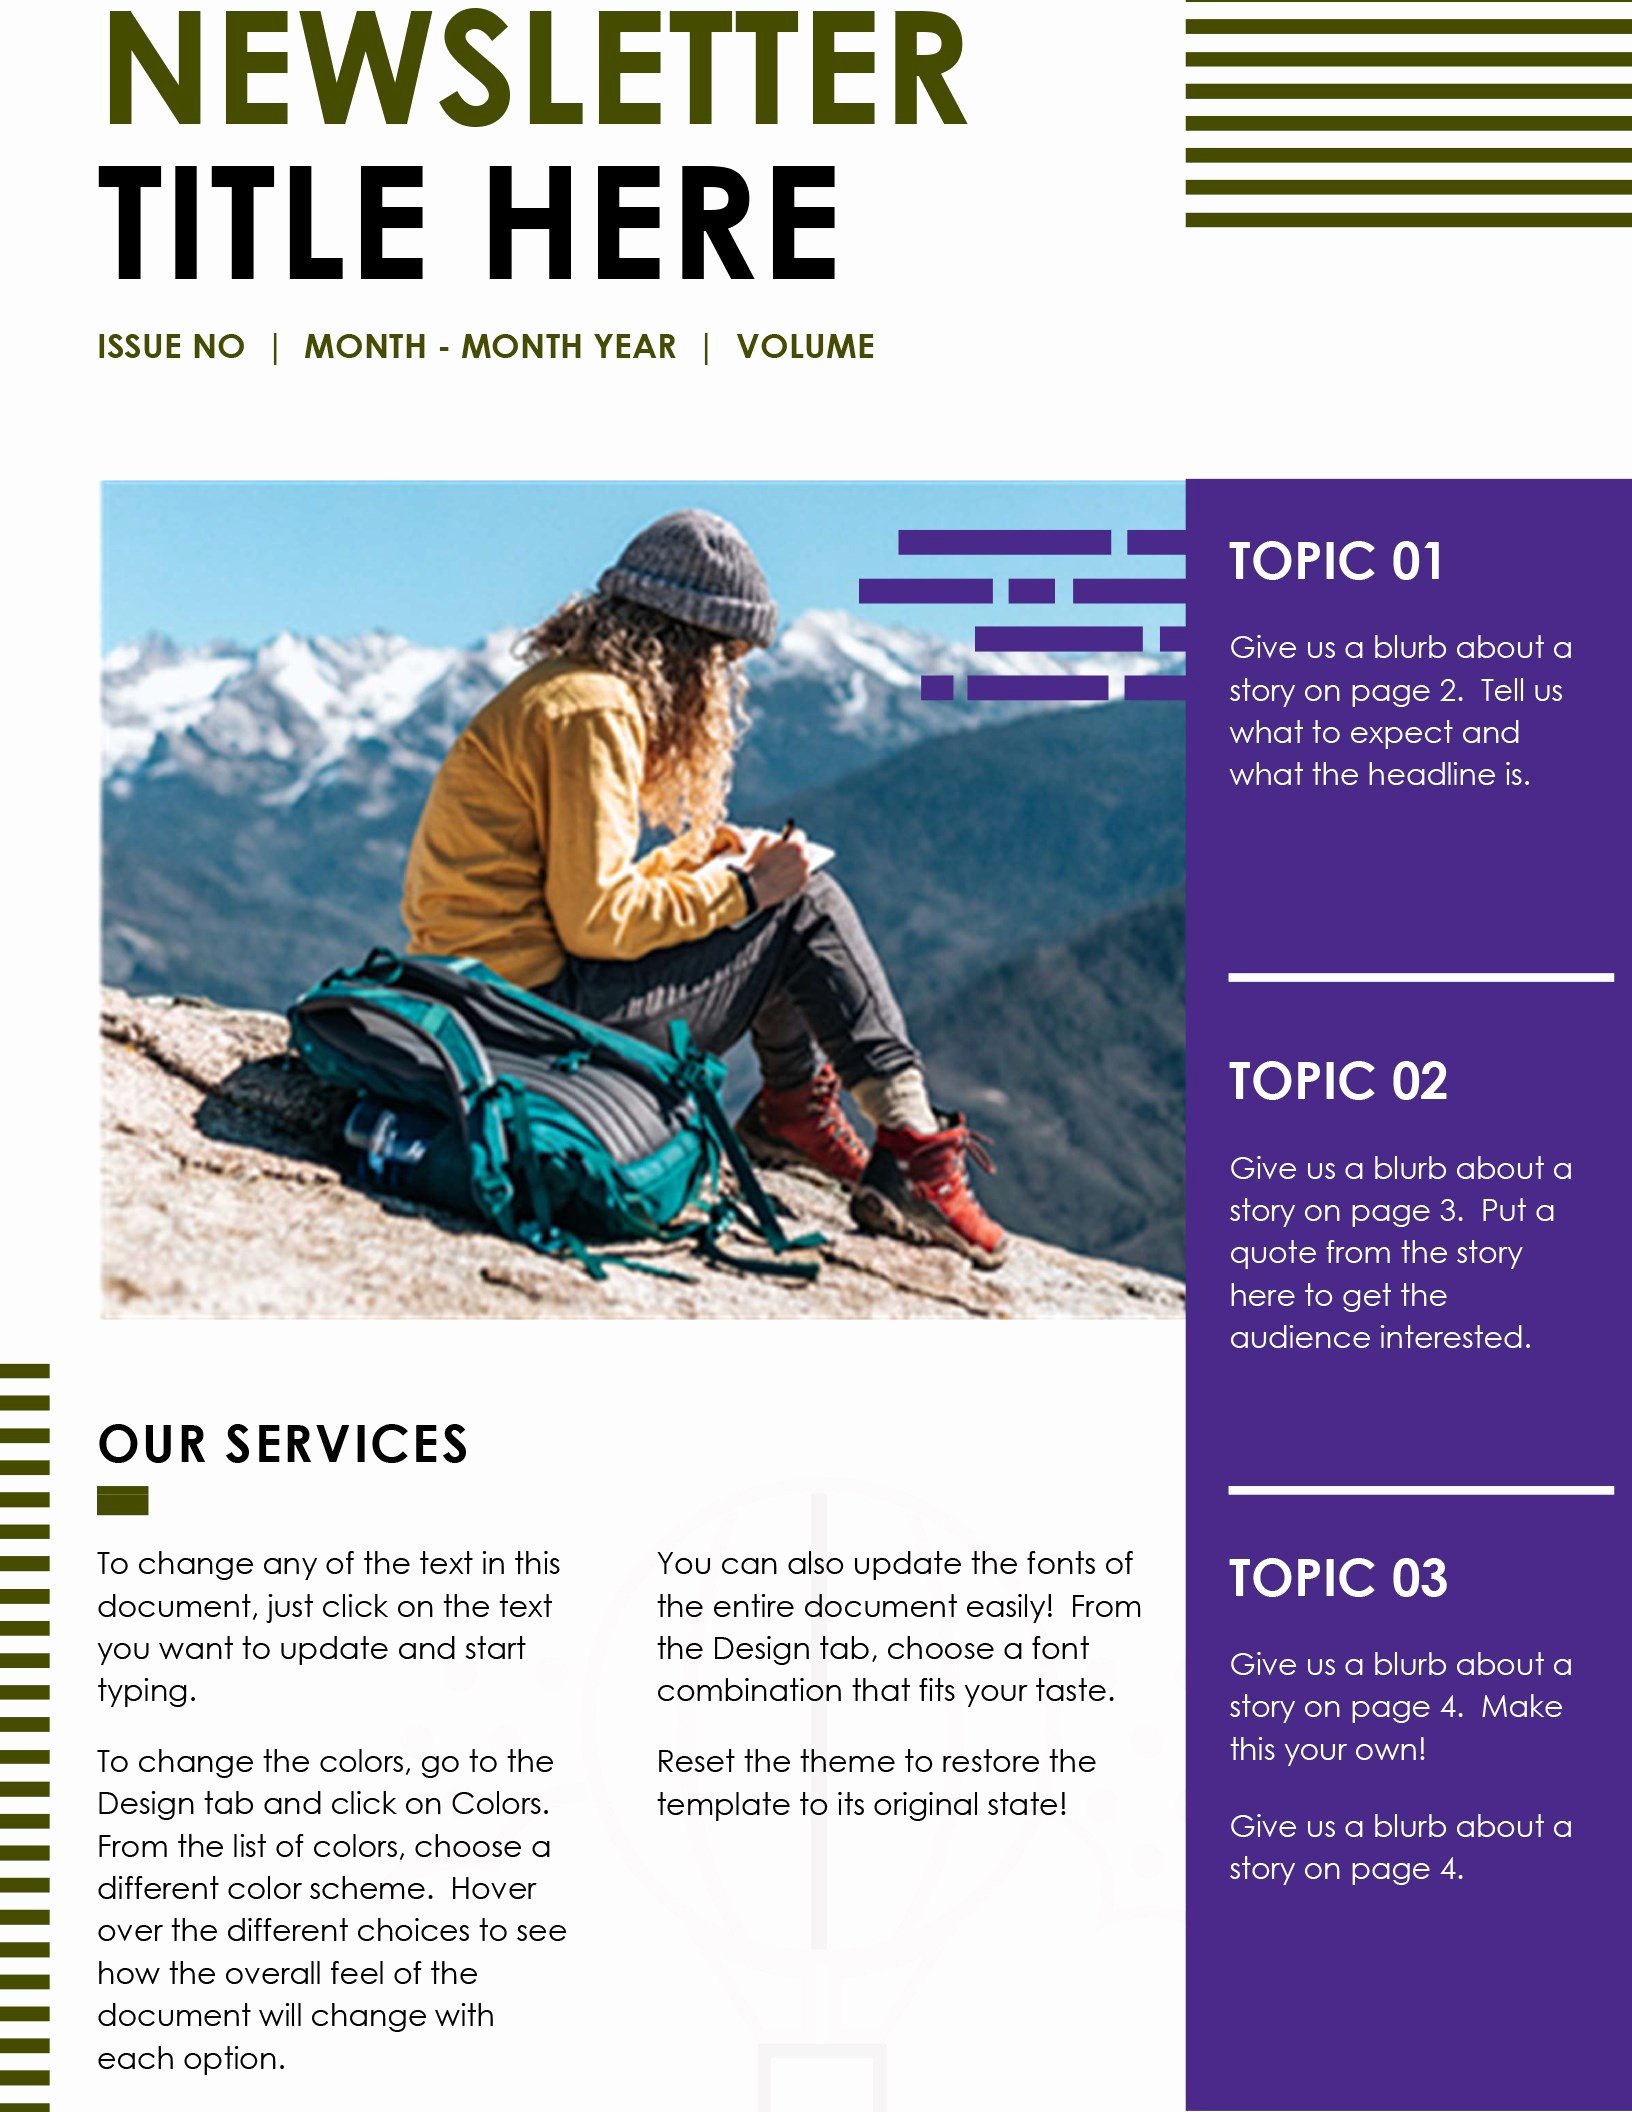 Microsoft Office Newspaper Templates Unique Newsletters Fice